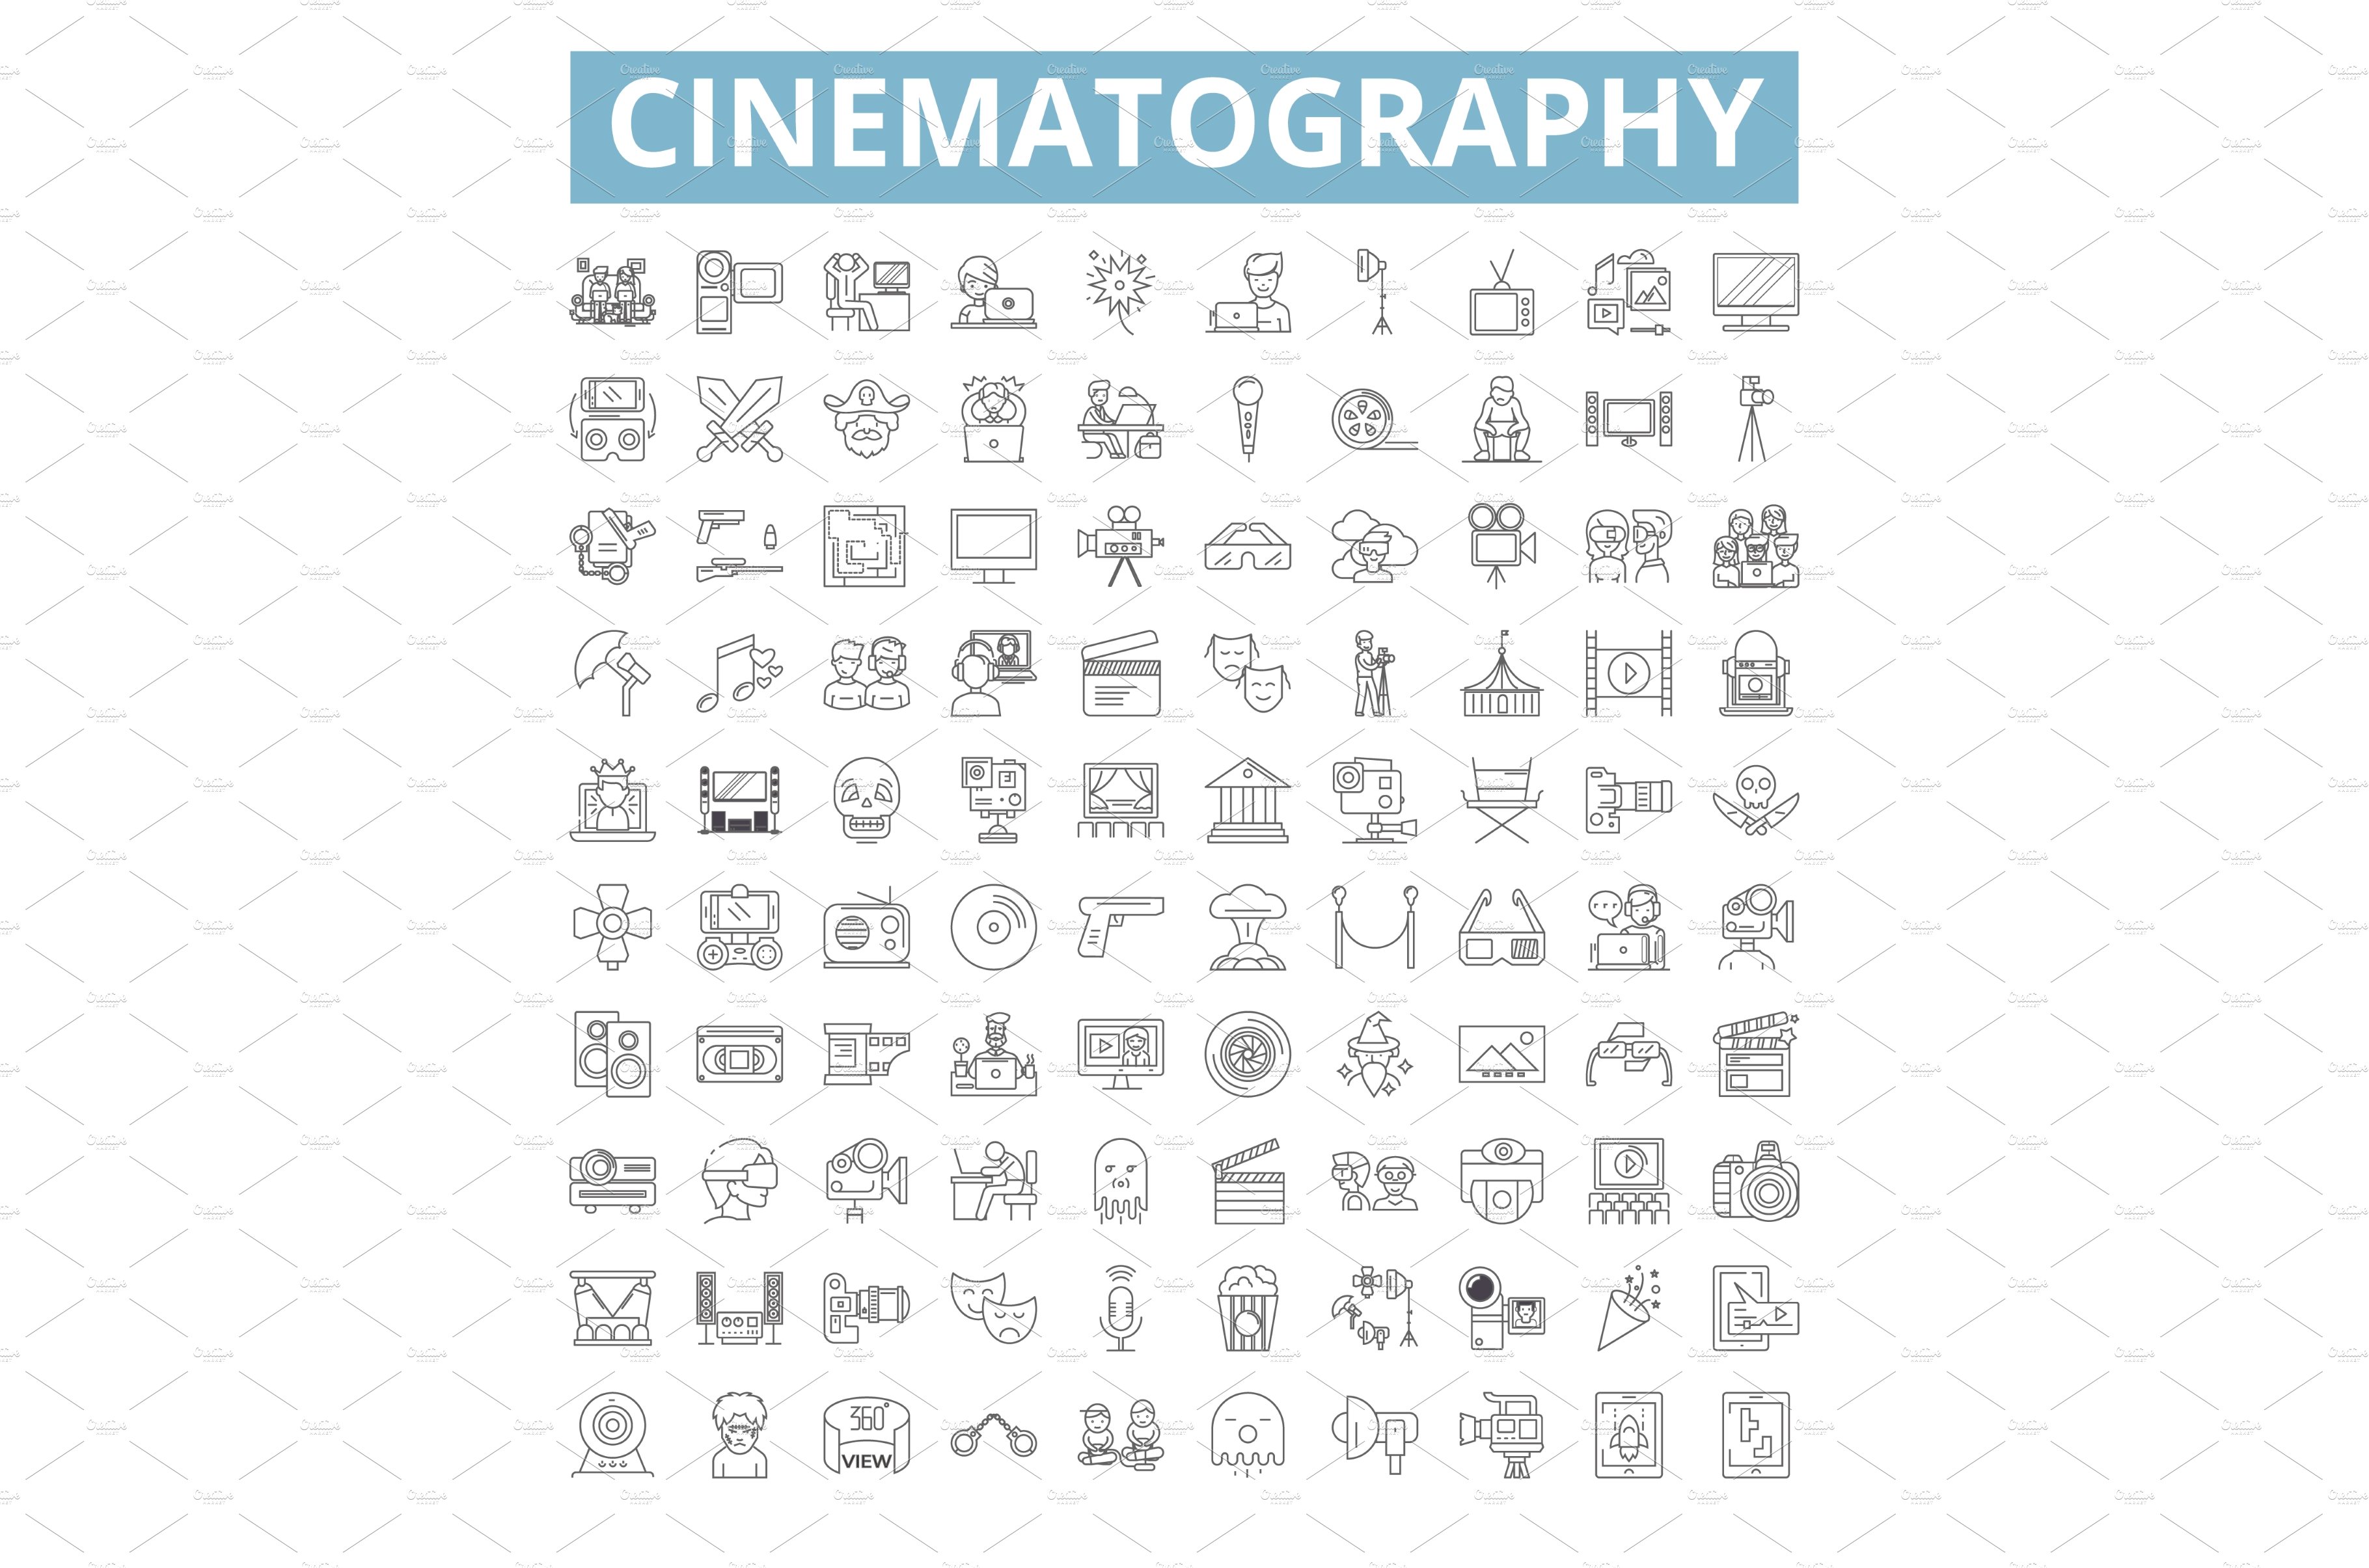 Cinematography icons, line symbols cover image.